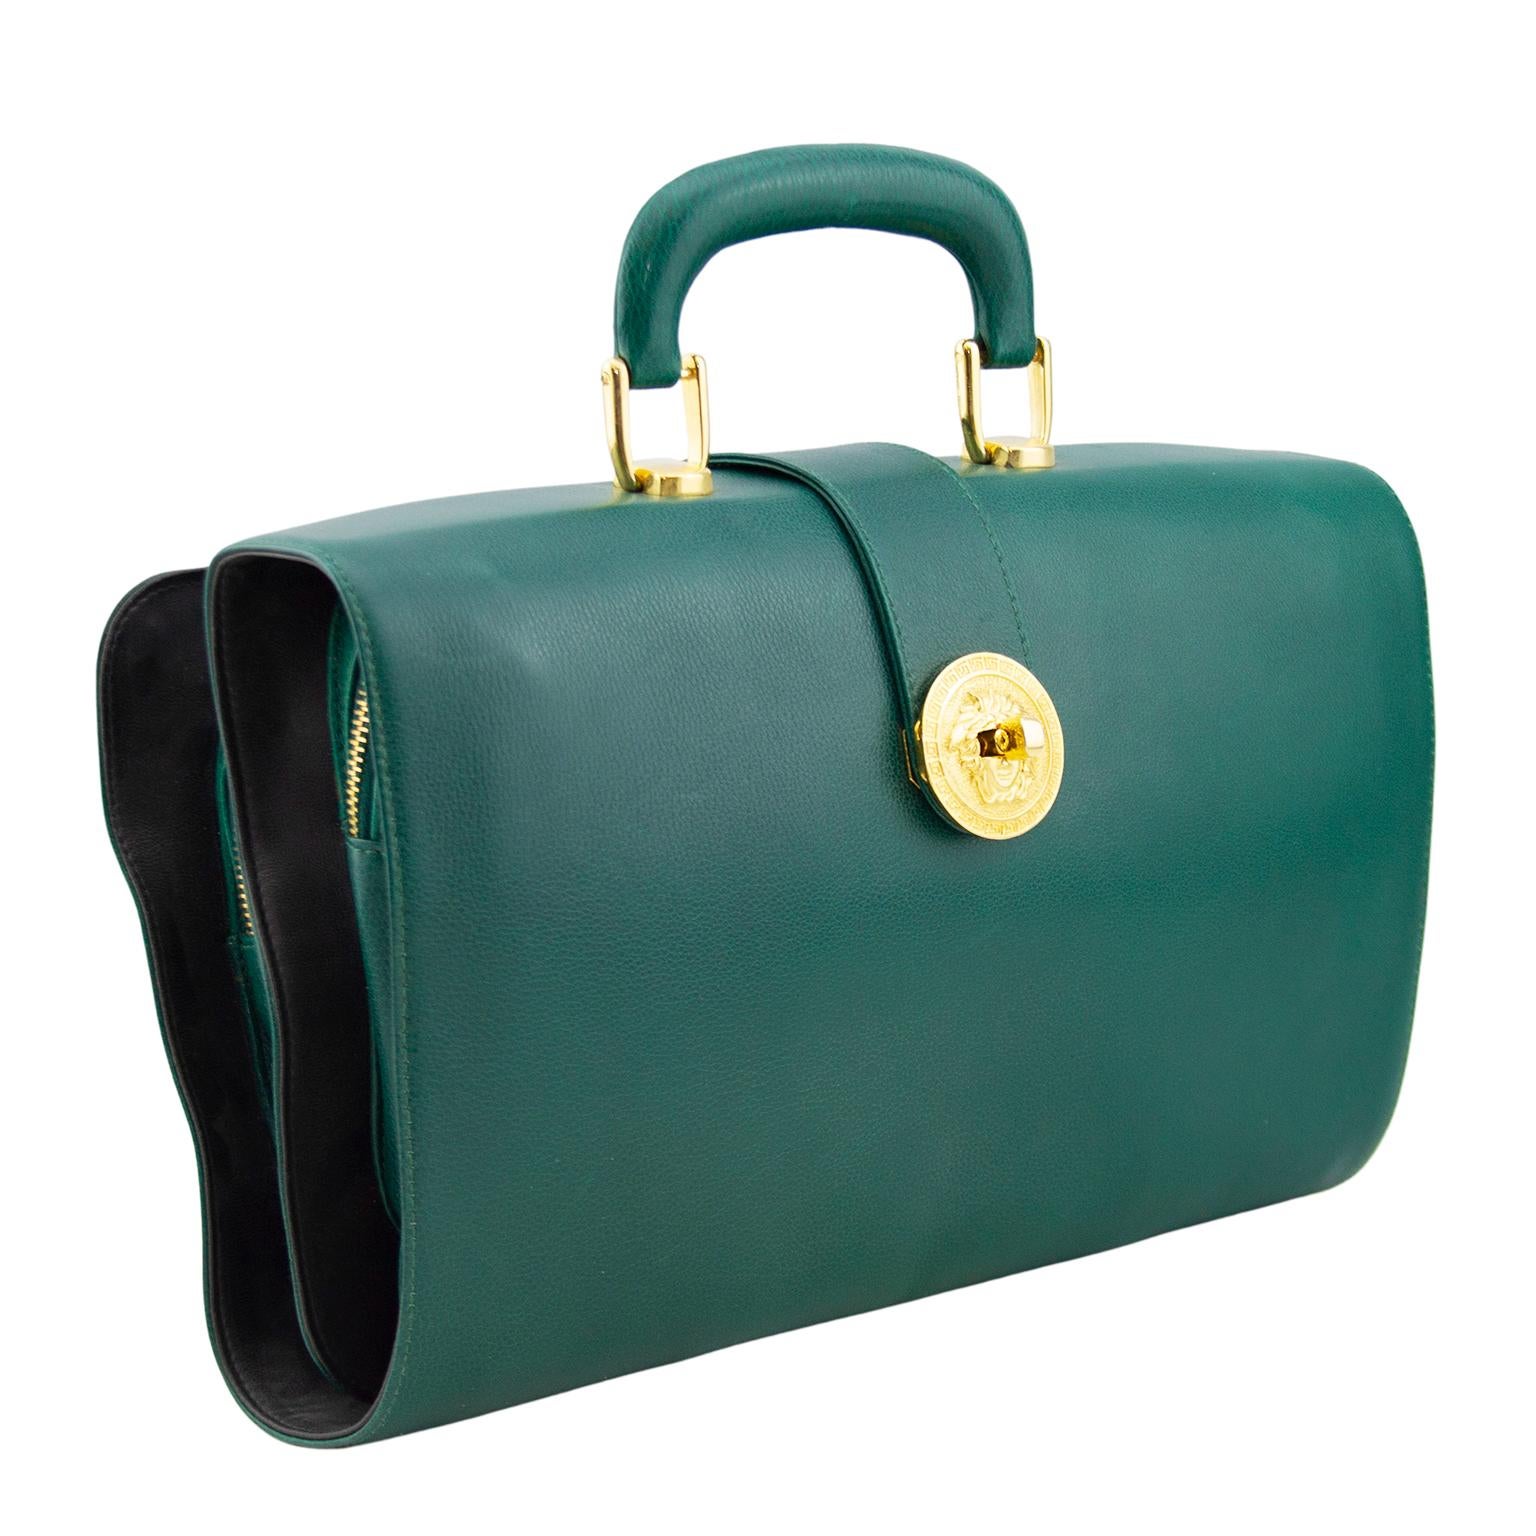 Very unique Versace dark green leather folding travel bag from the 1990s. Single top handle and gold tone hardware with large round Medusa twist lock closure. Bag unfolds revealing many pockets of varying size for packing everything you need from